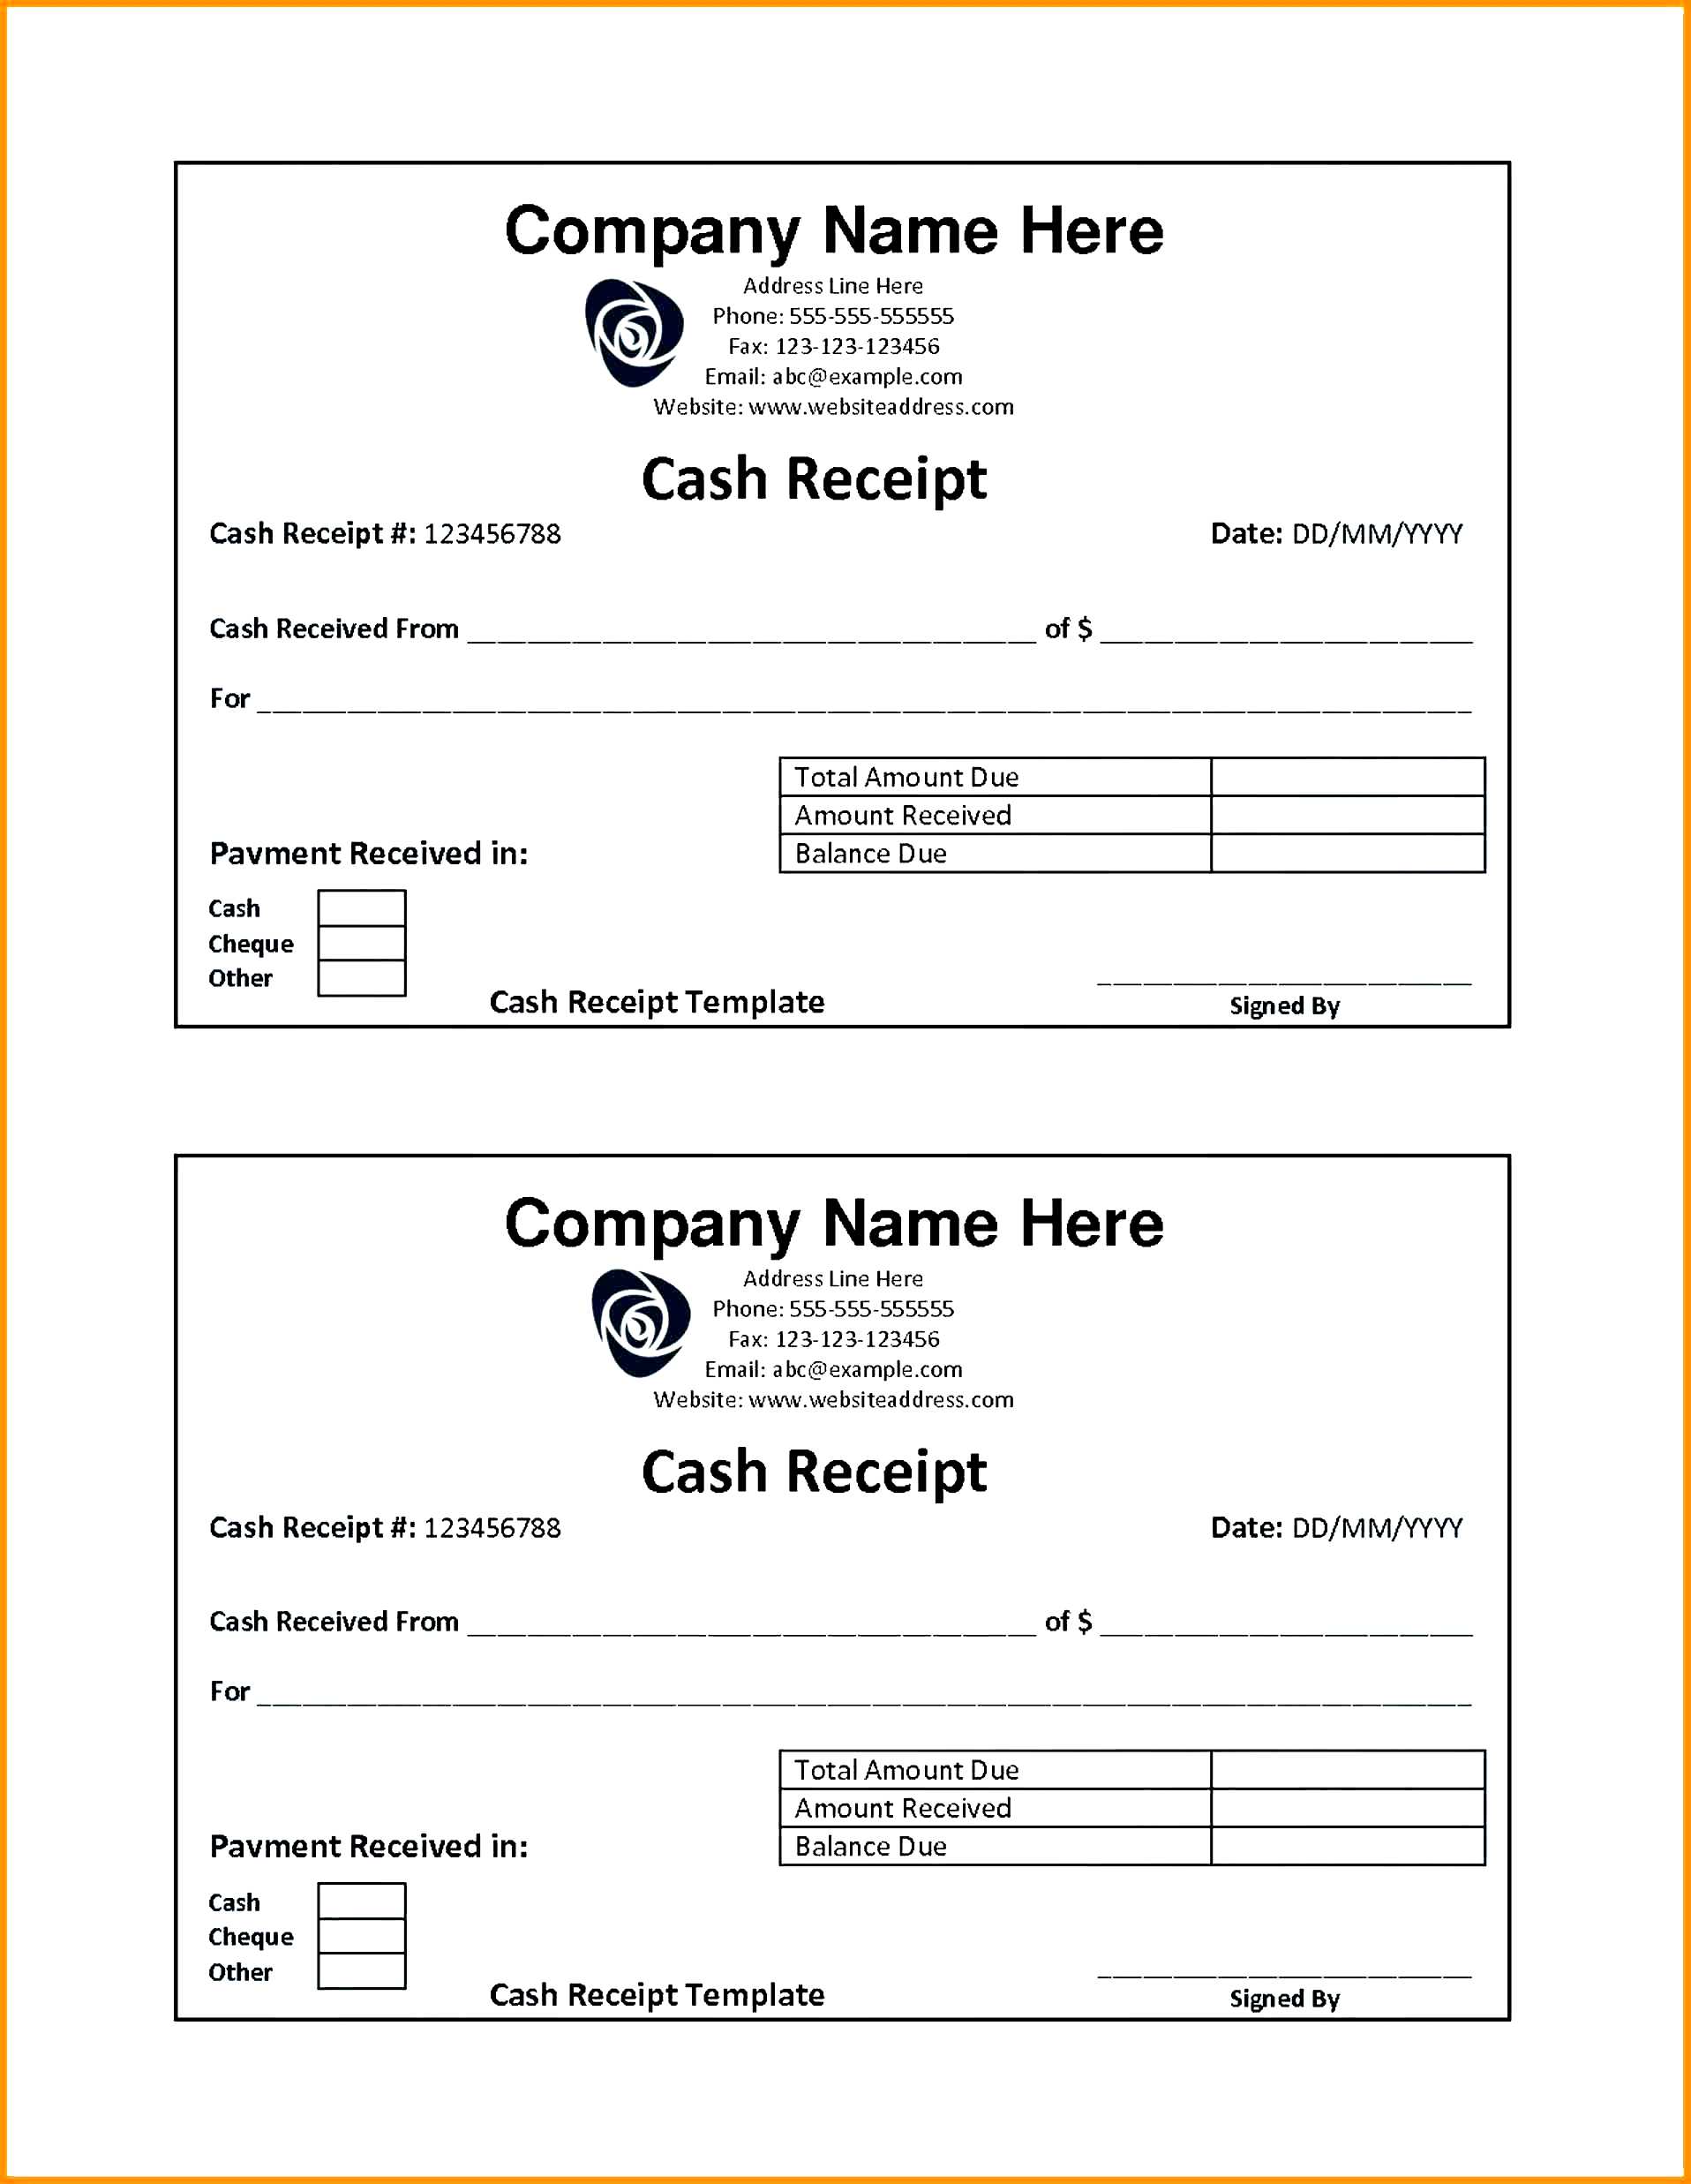 cash receipt template word doc free india simple resume